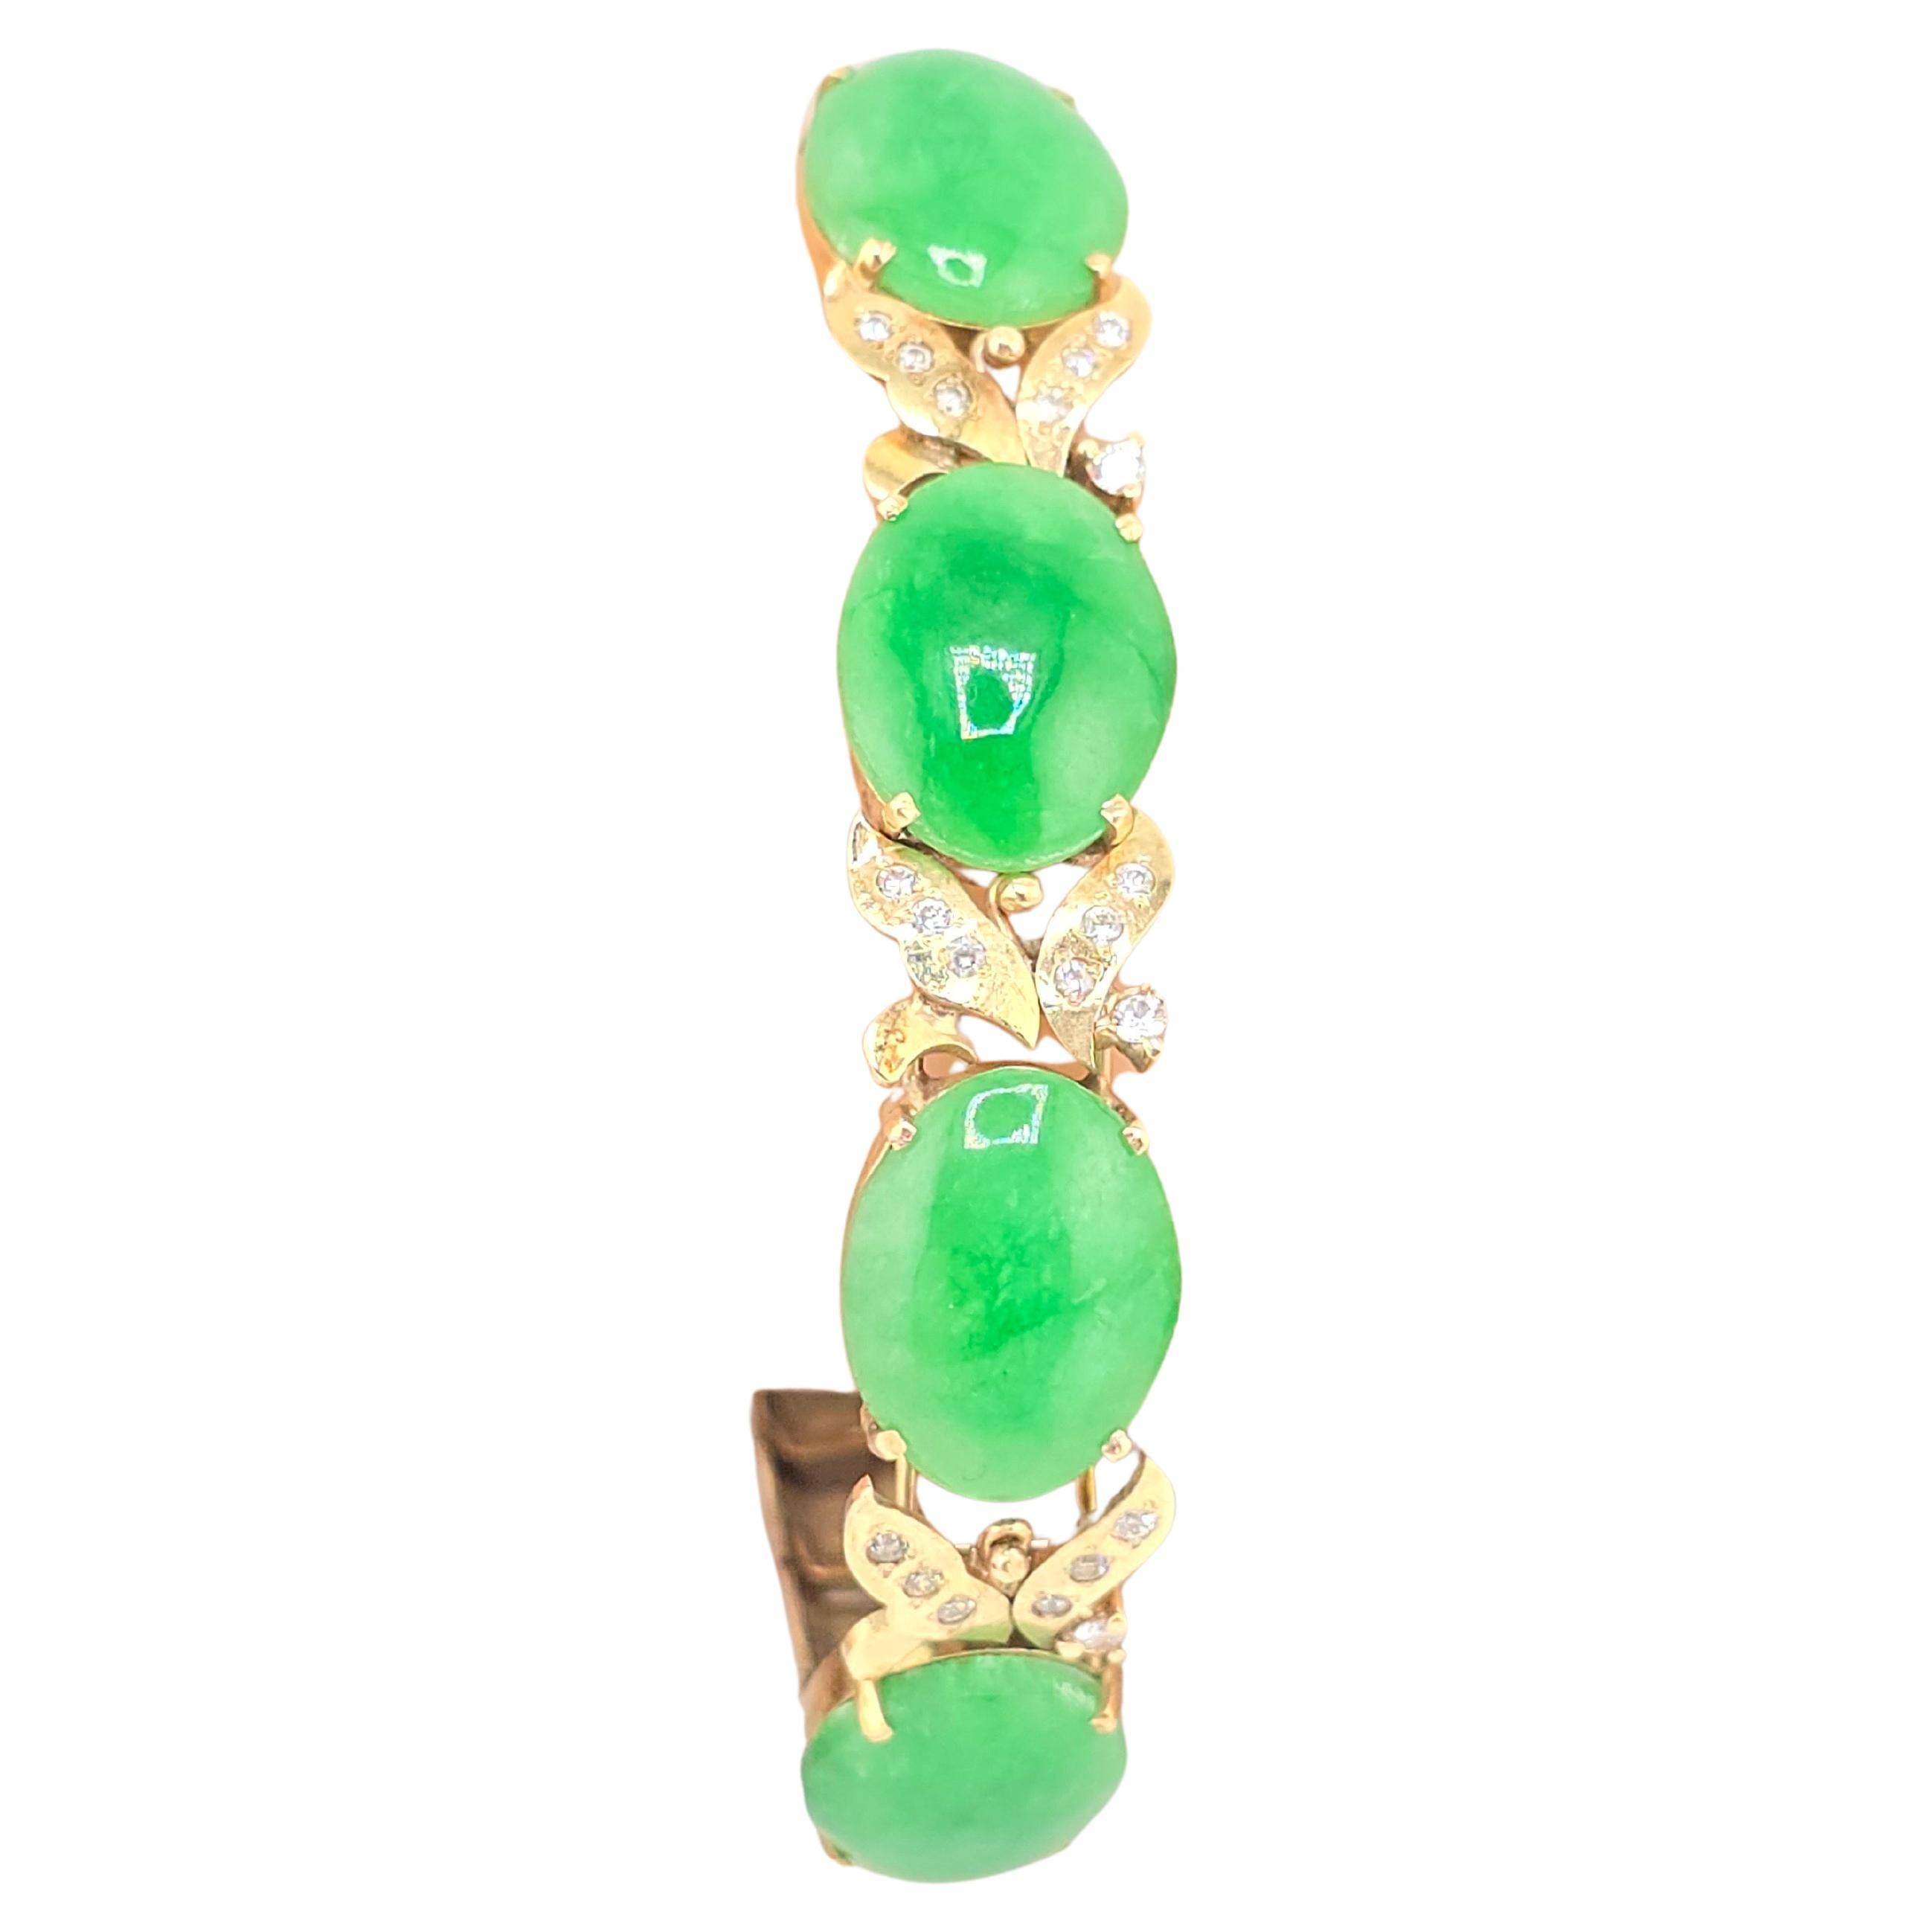 This is a gorgeous, 14 karat yellow gold diamond and green jadeite bracelet. The jades color is extremely vibrant like a forest green. Each stone is easily over 3 carats. There are many diamonds in each section next to the jade possibly 1/4 carat